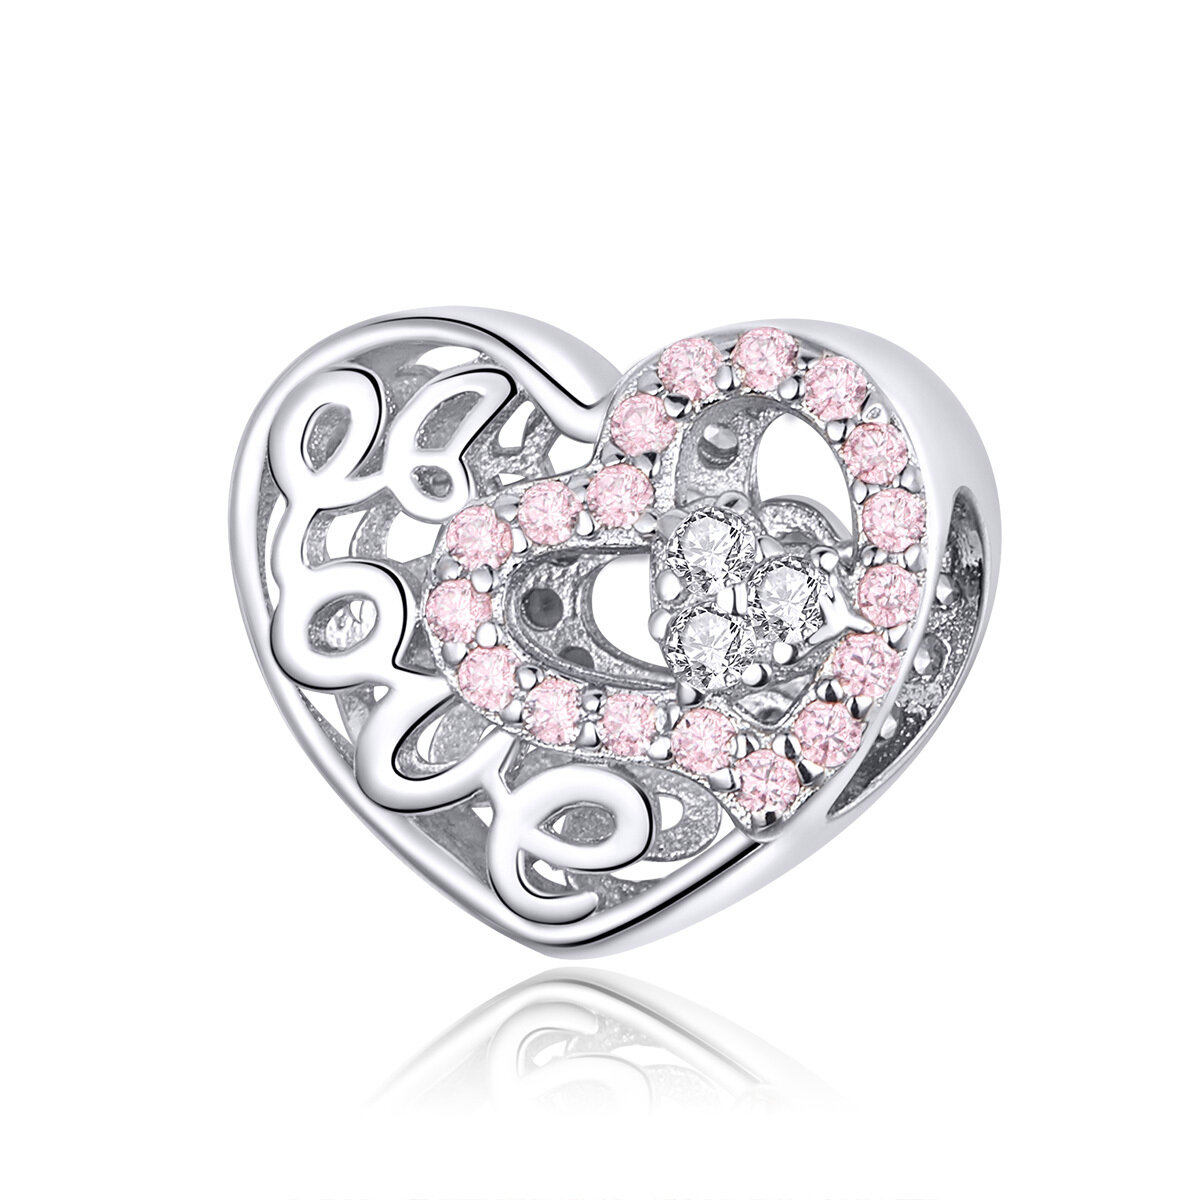 GemKing SCC1301 Beautiful Love S925 Sterling Silver Charm